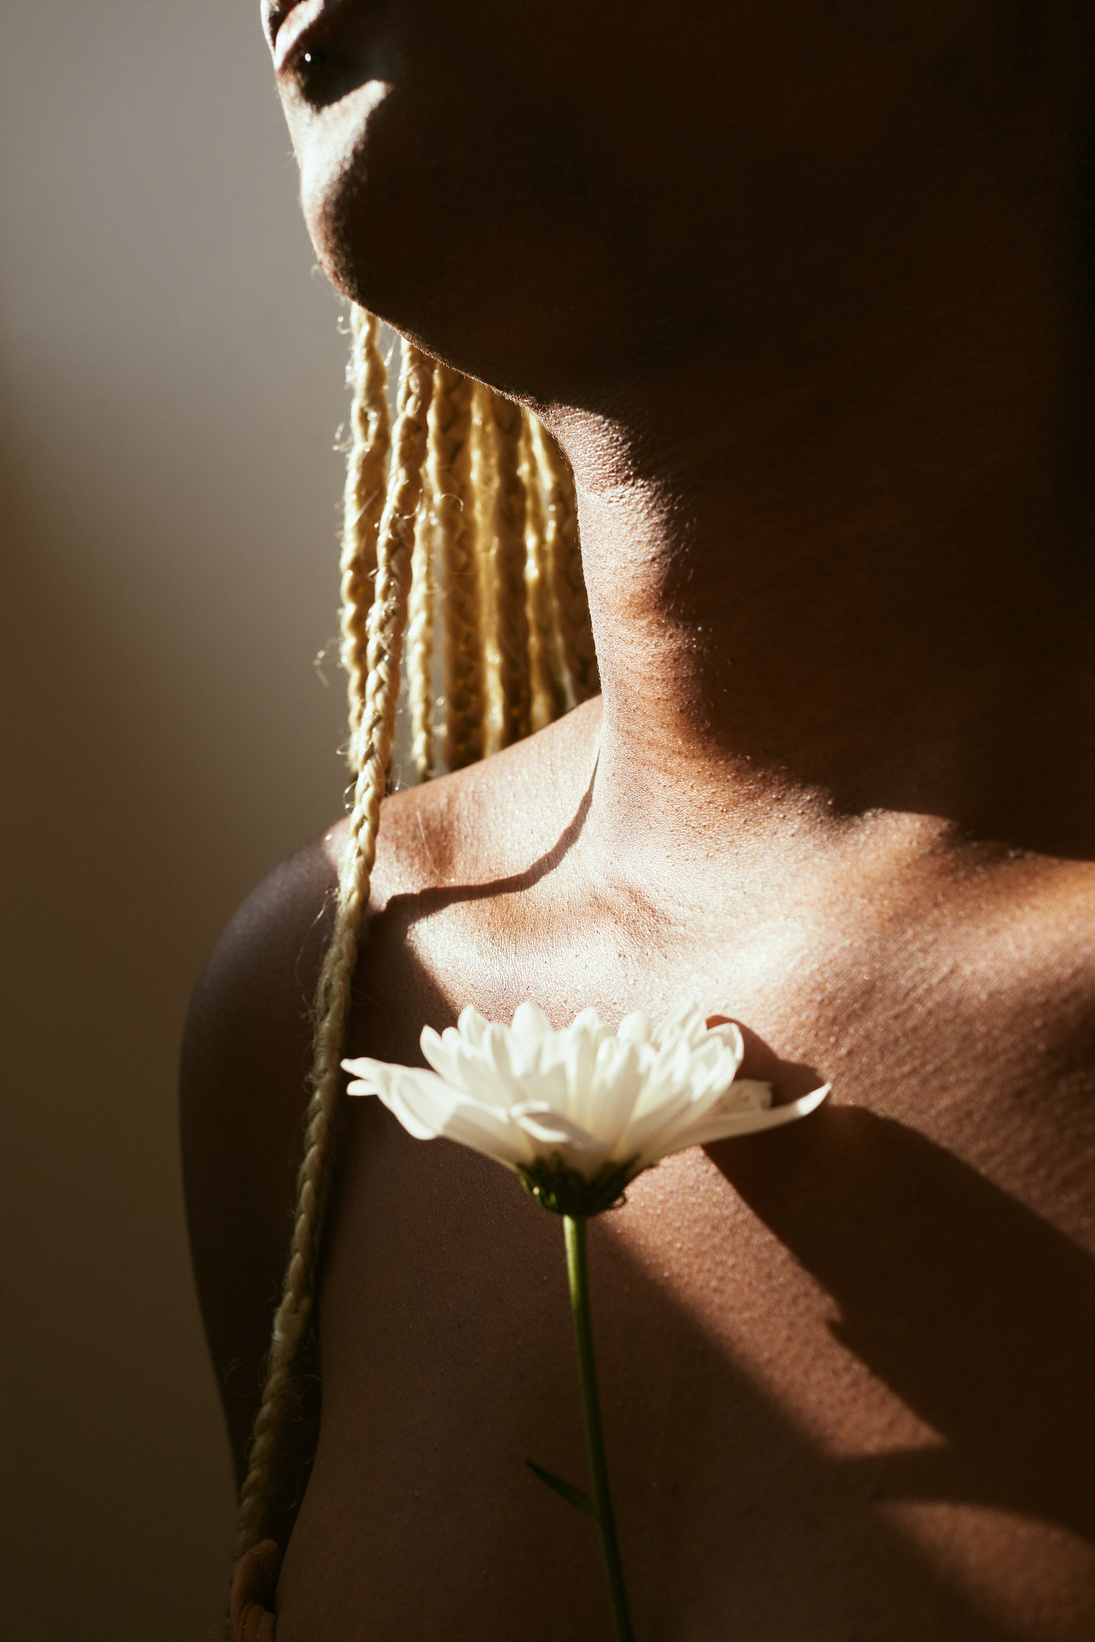 Portrait of Woman with Flowers and Dramatic Lighting